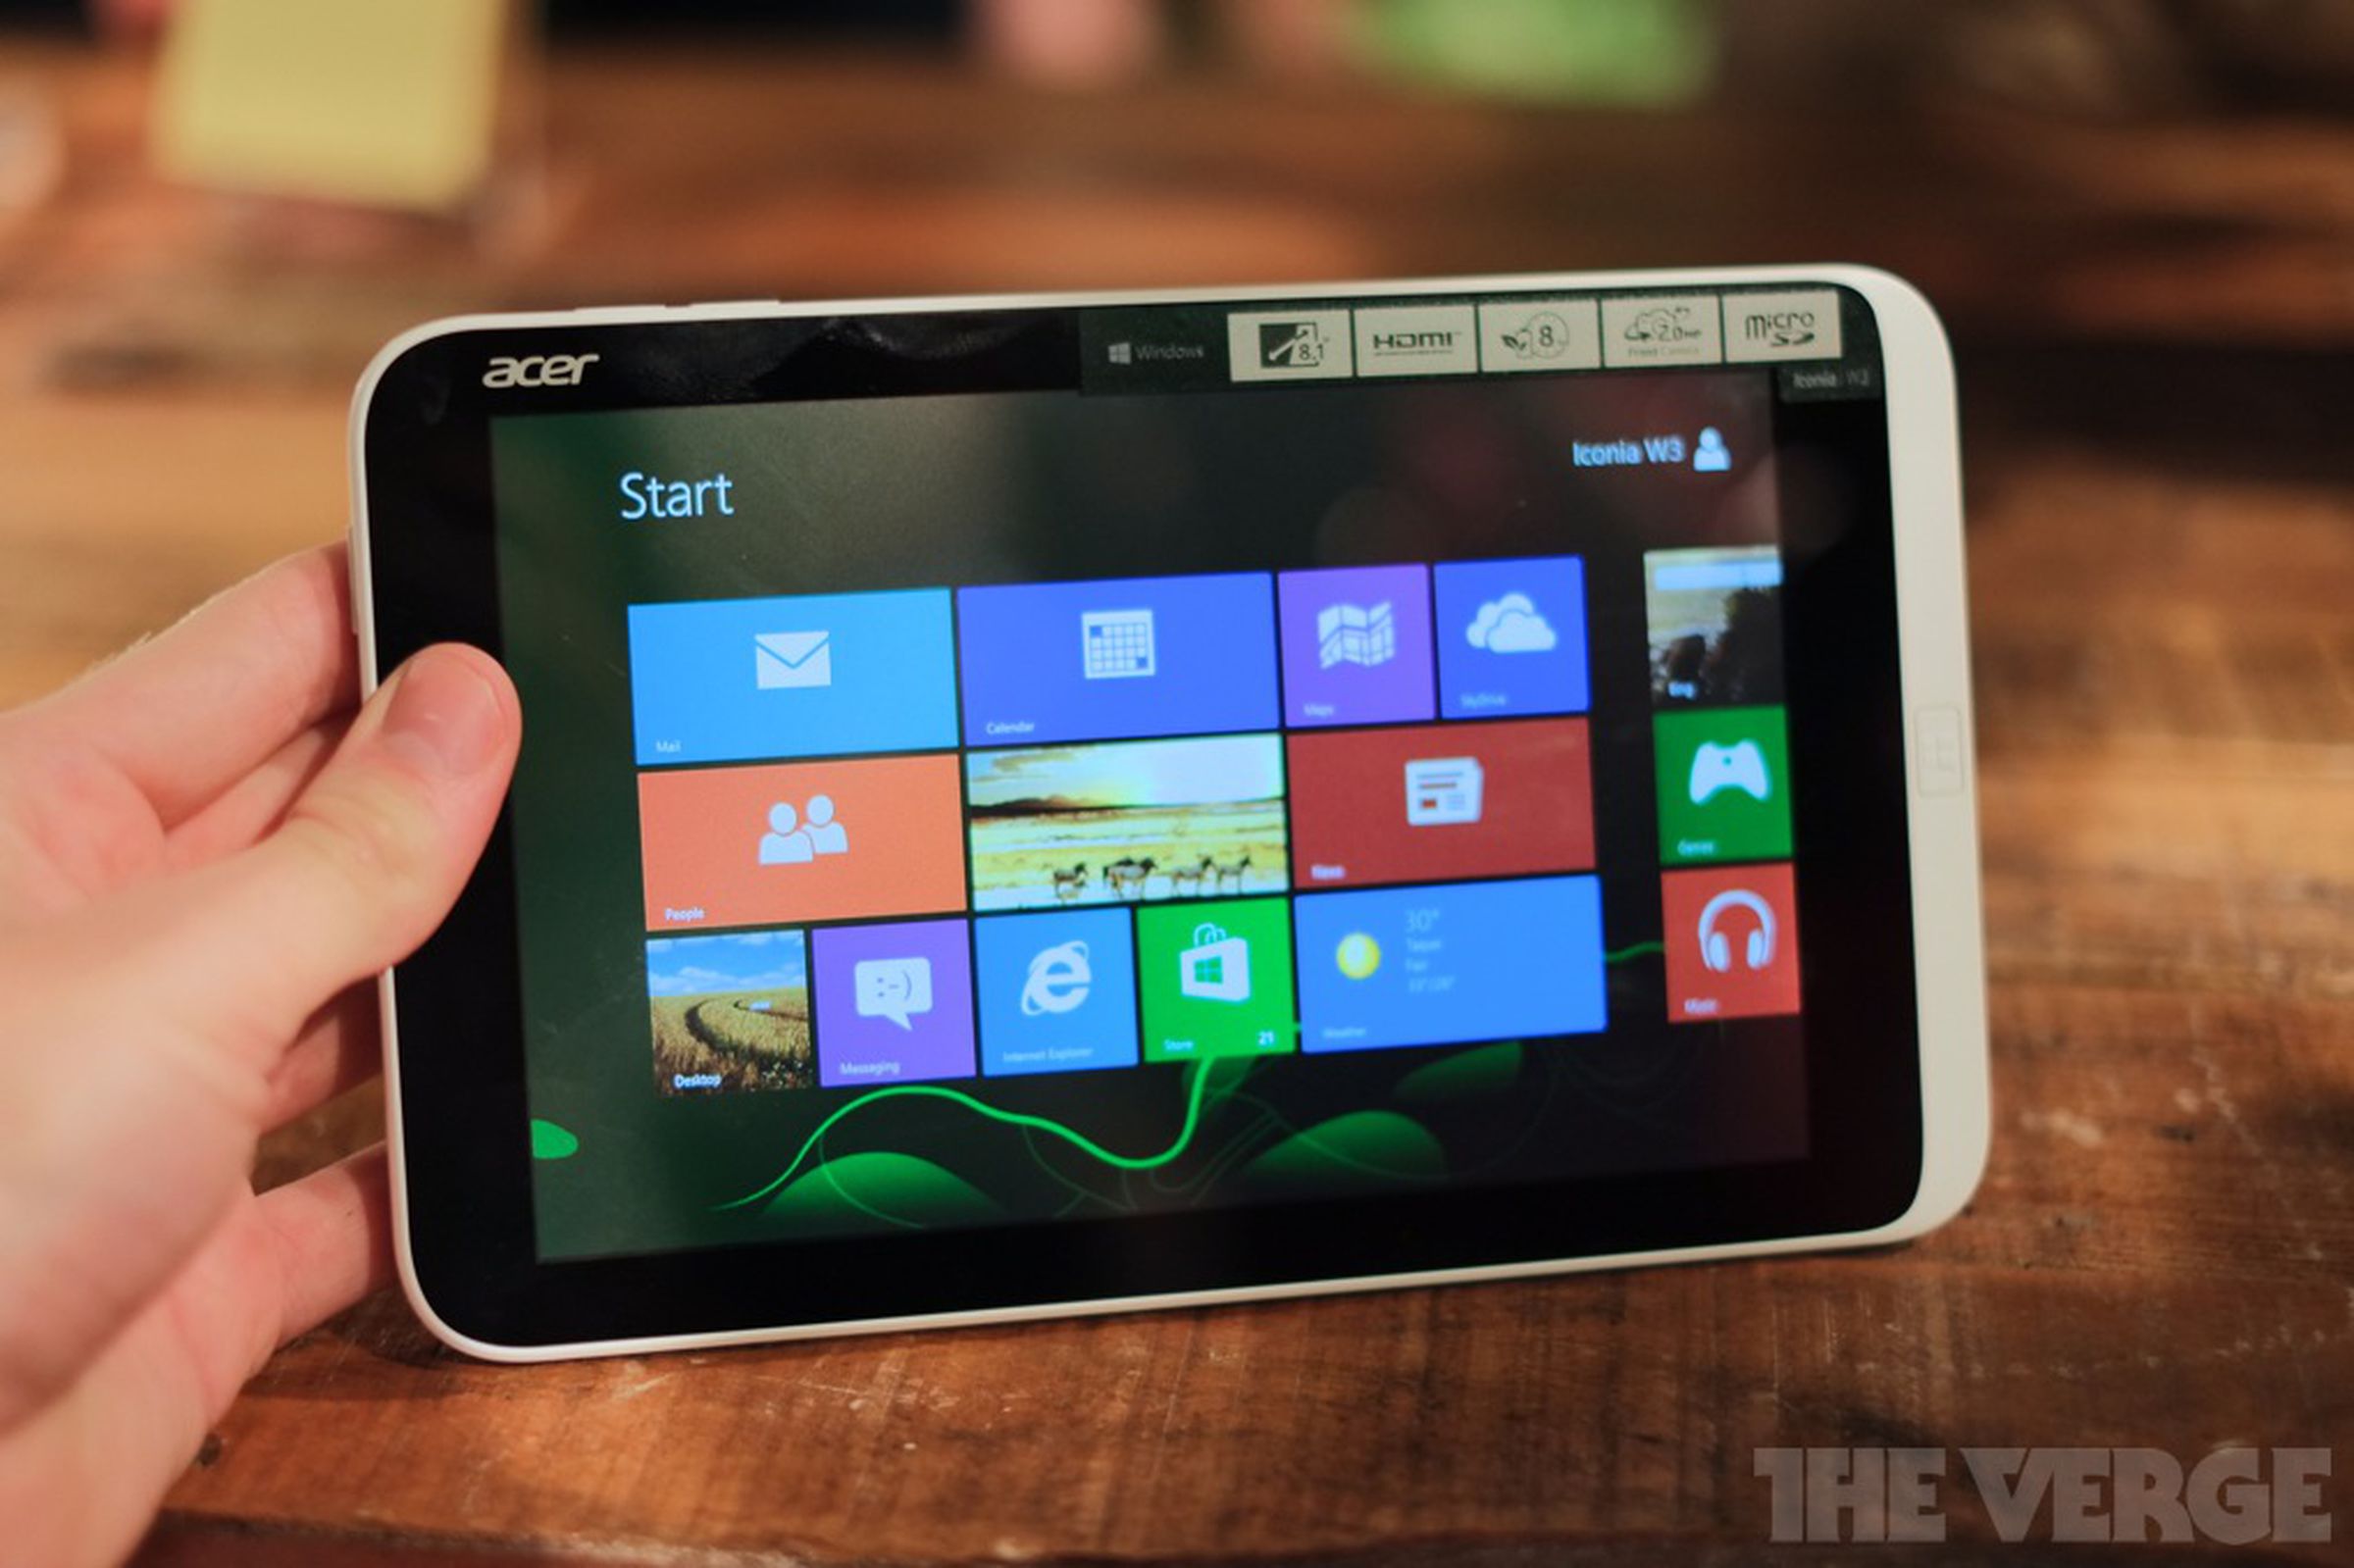 Acer Iconia W3 hands-on photos